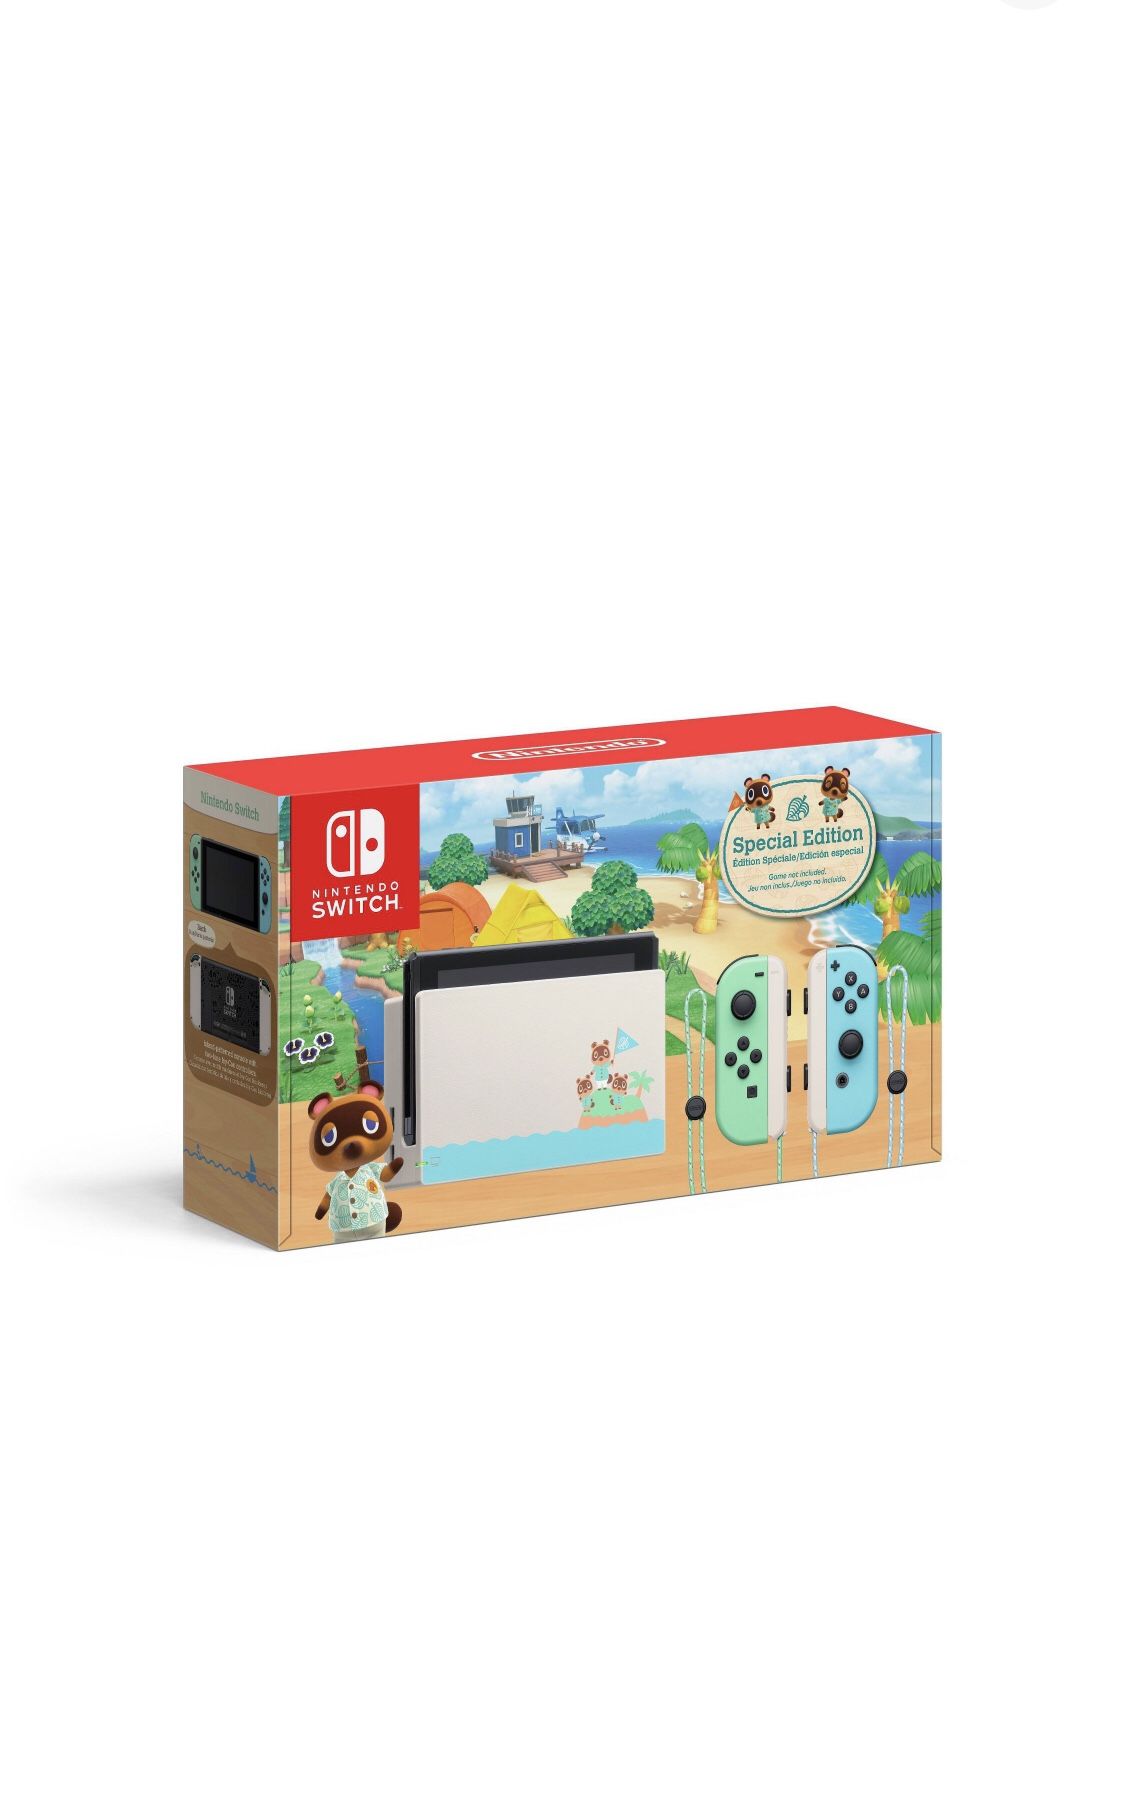 Nintendo Switch Console Animal Crossing Special Edition BRAND NEW SEALED! PRICED TO SELL NO HAGGLING ON PRICE! $410 CASH ONLY! No trades!